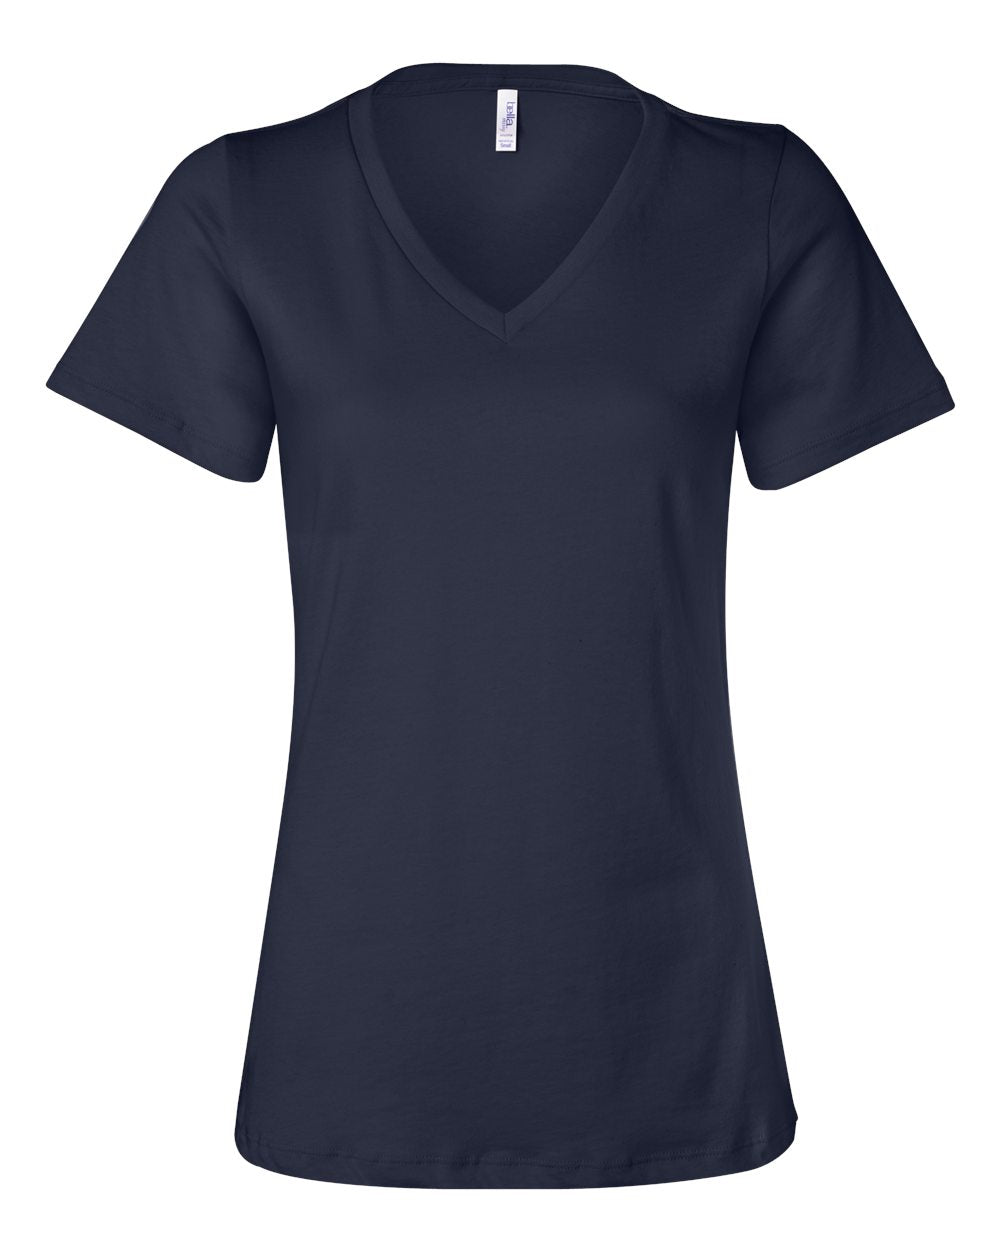 bella+canvas womens relaxed v-neck tee navy